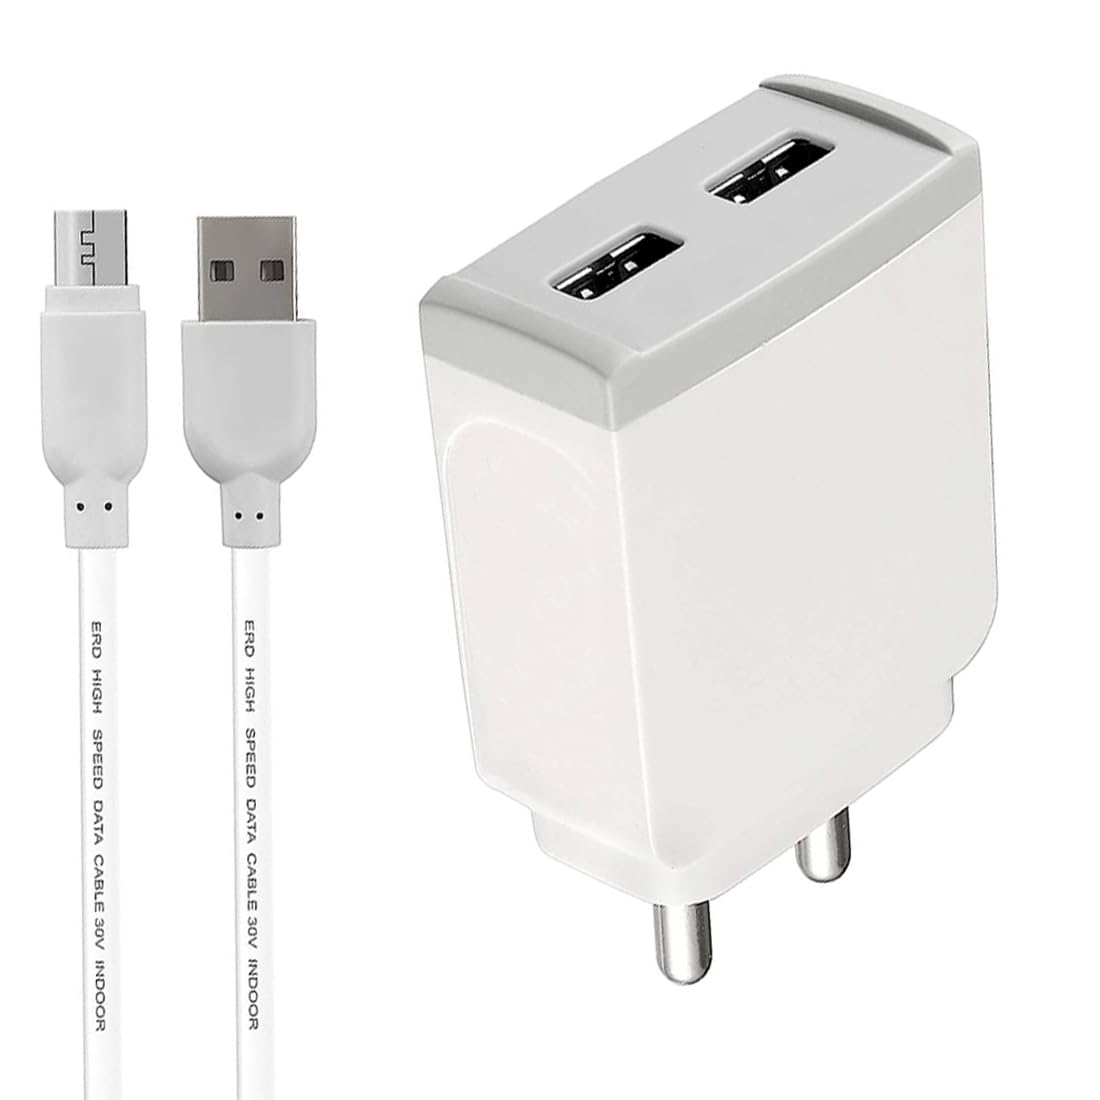 4Amp Fast Wall Charger for Samsung, Oppo, Vivo, Mi, Redmi | 5Volt Adapter with Data Transfer Fast Charging USB Cable